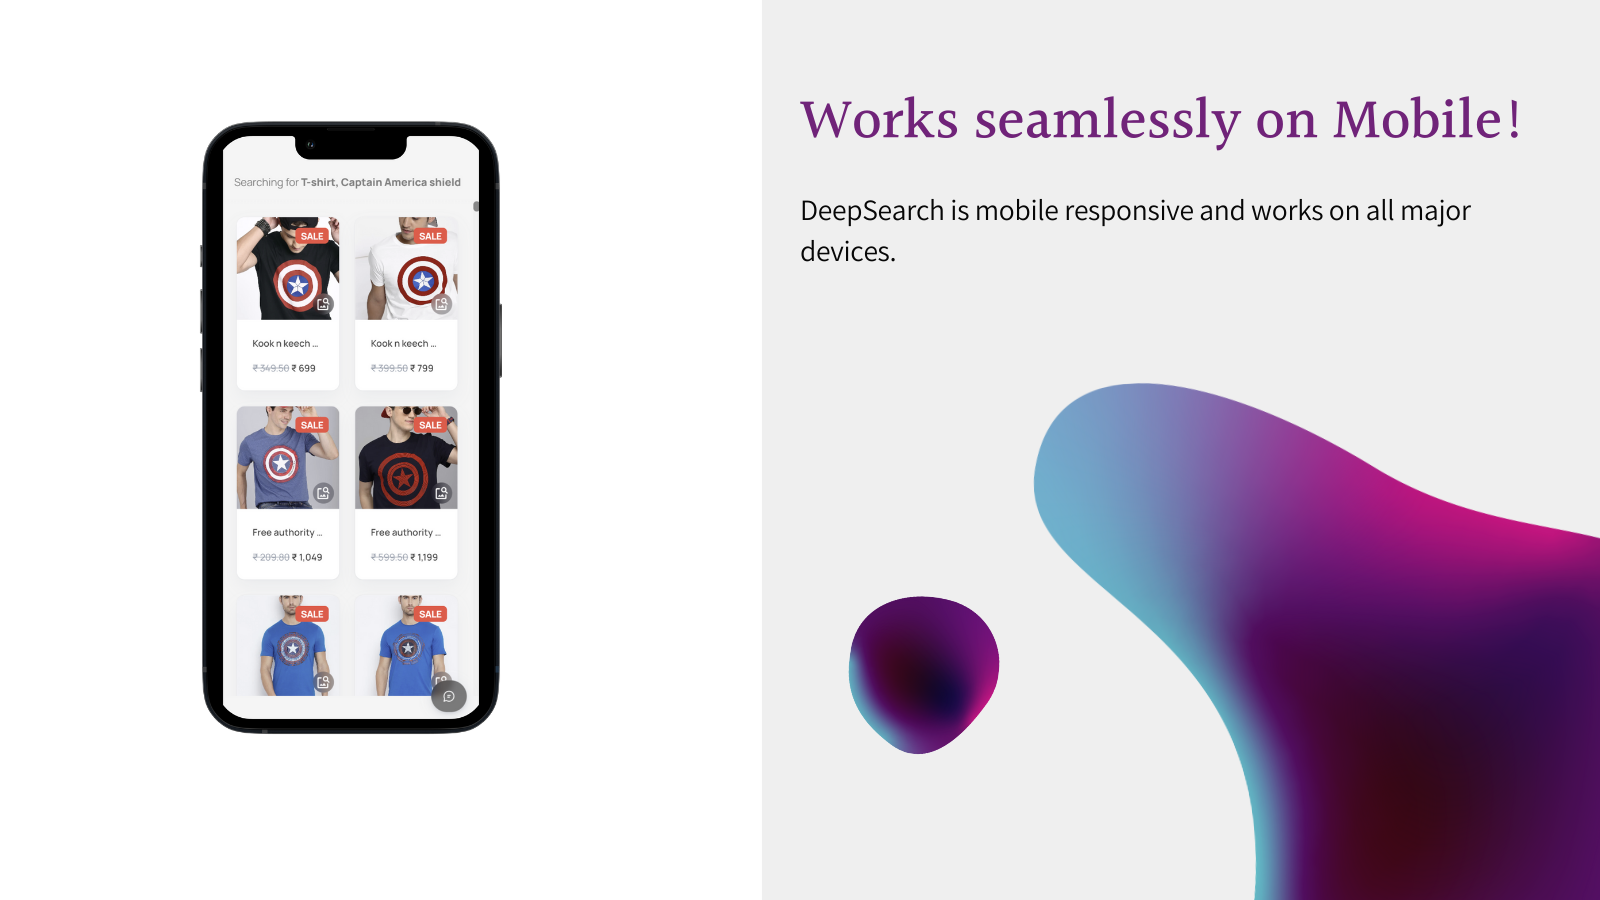 DeepSearch is Mobile Responsive